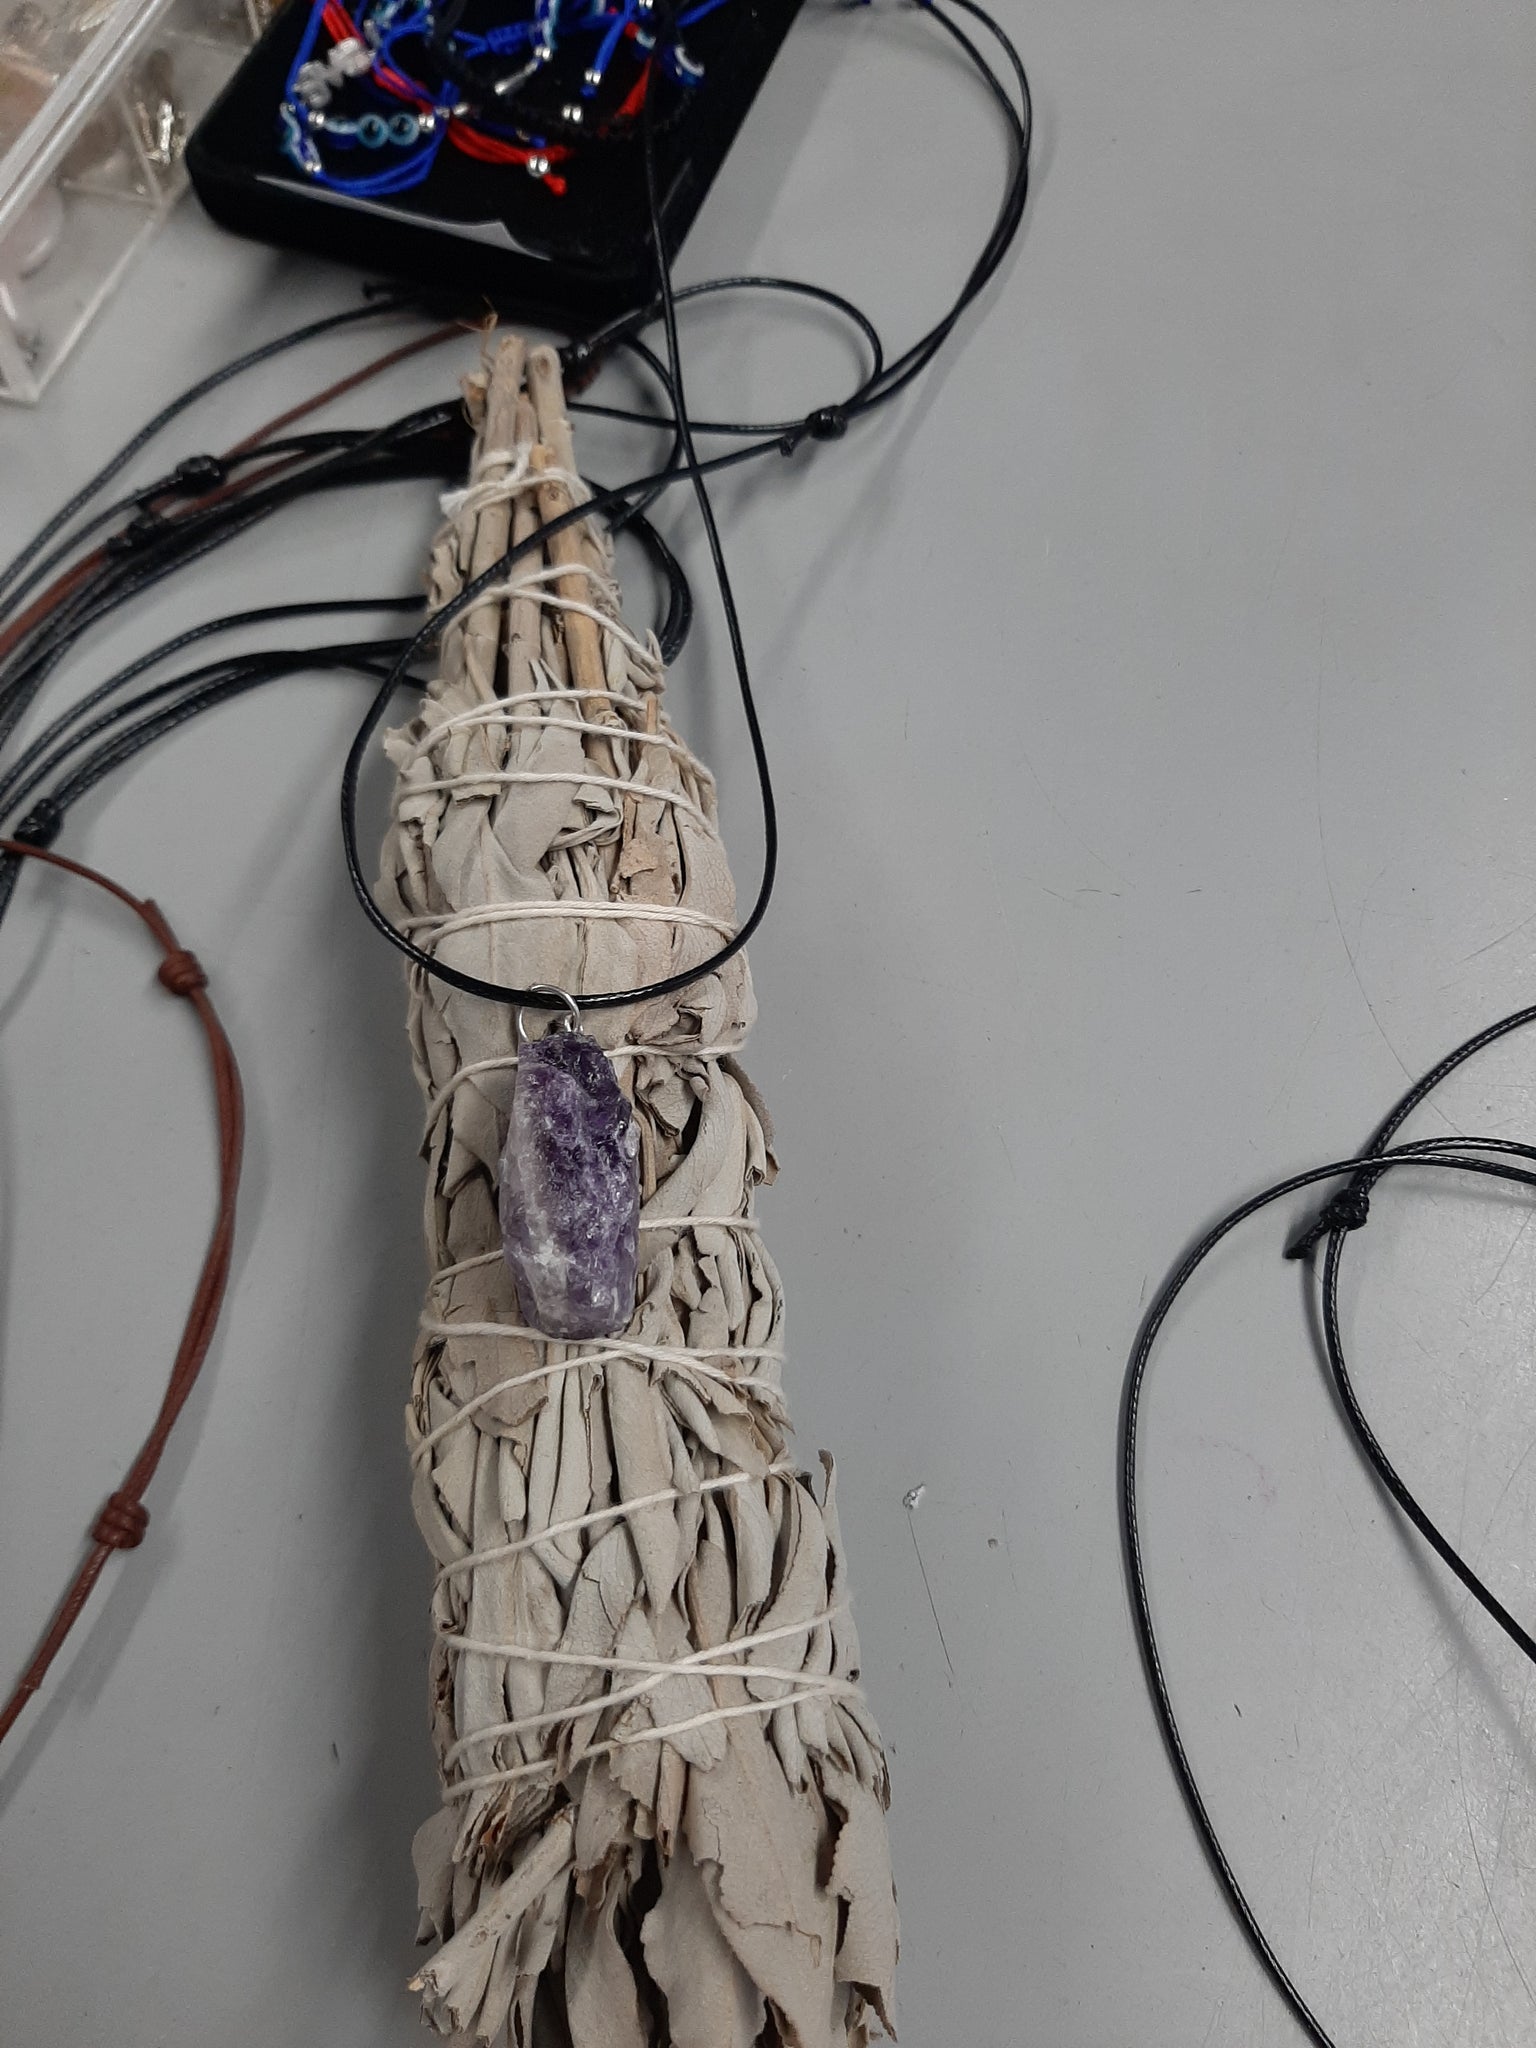 Raw Crystal Necklace